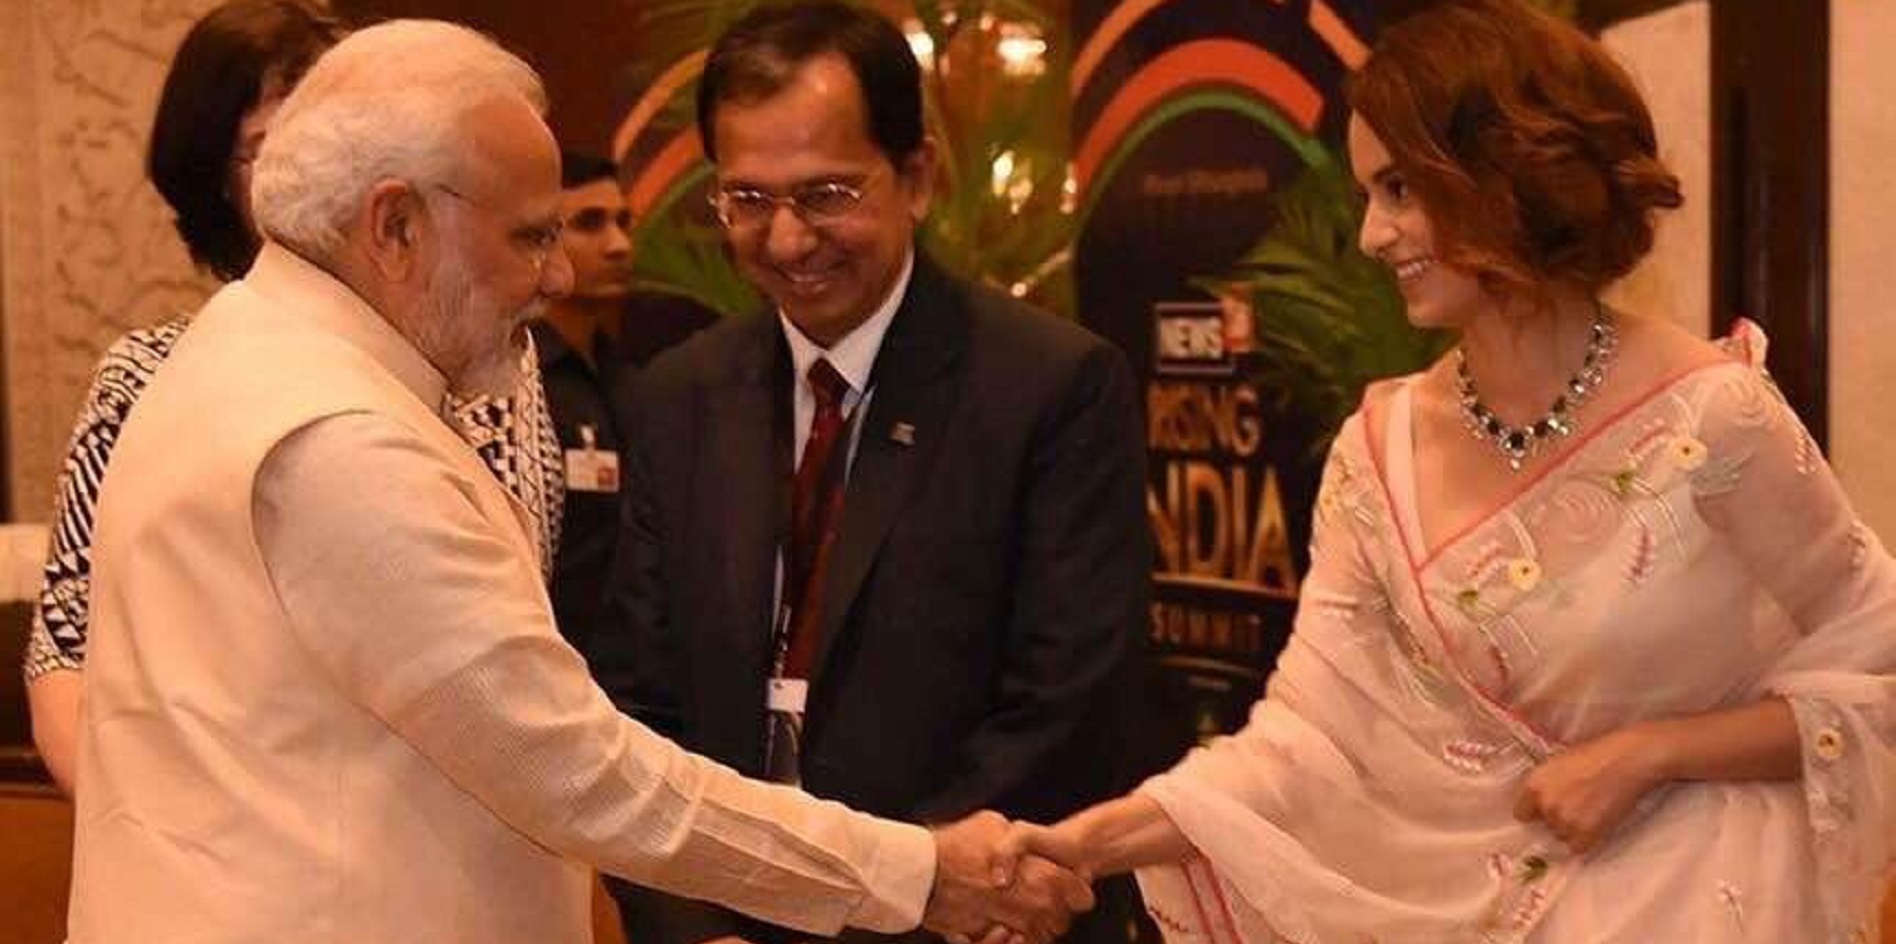 Kangana Ranaut on PM Modi: “The most powerful man on this planet and yet so humble!”